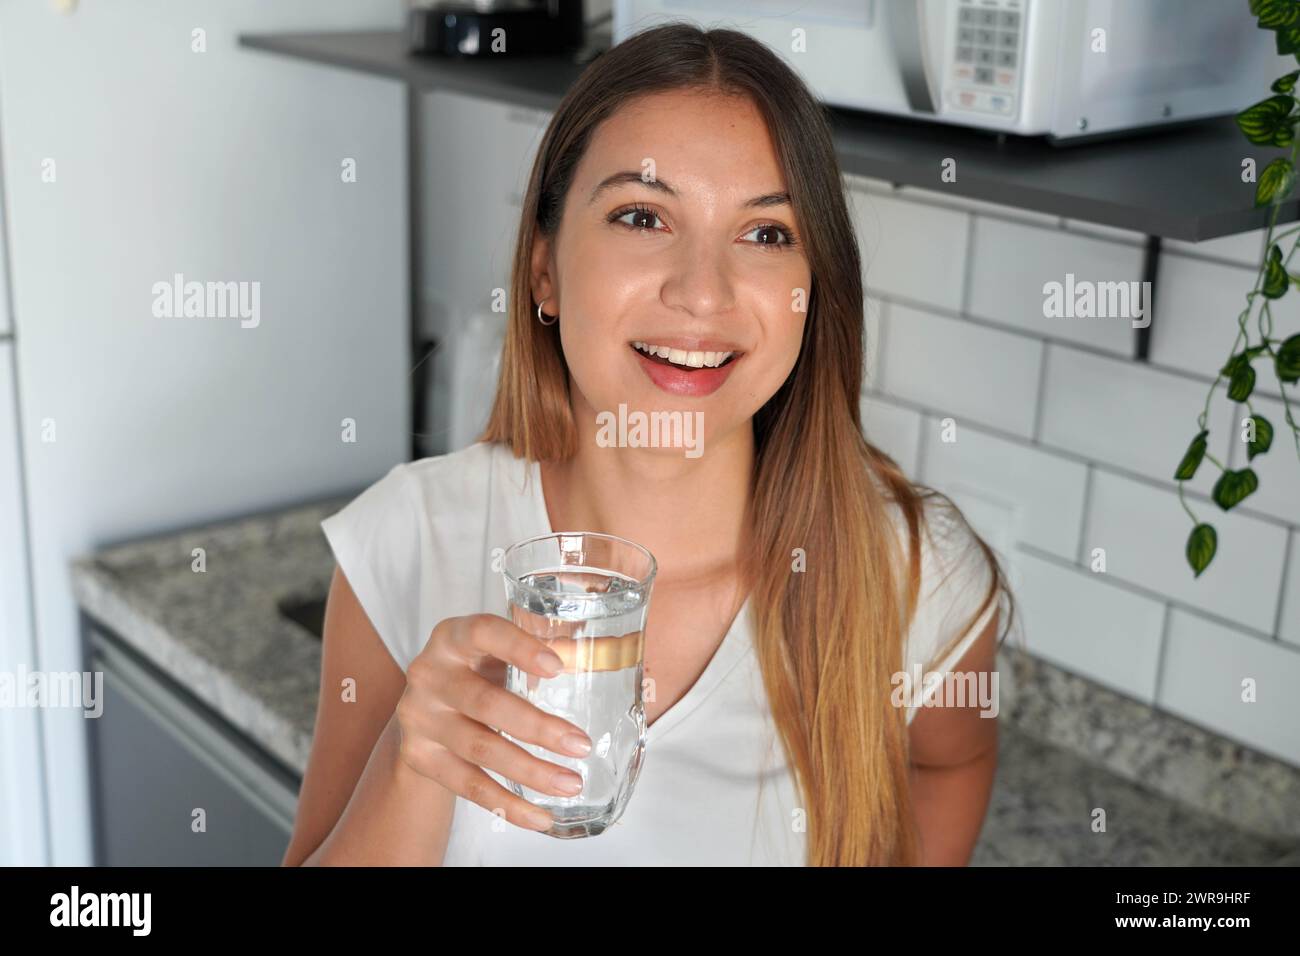 Beautiful young woman holding a glass full of water in the kitchen at home Stock Photo